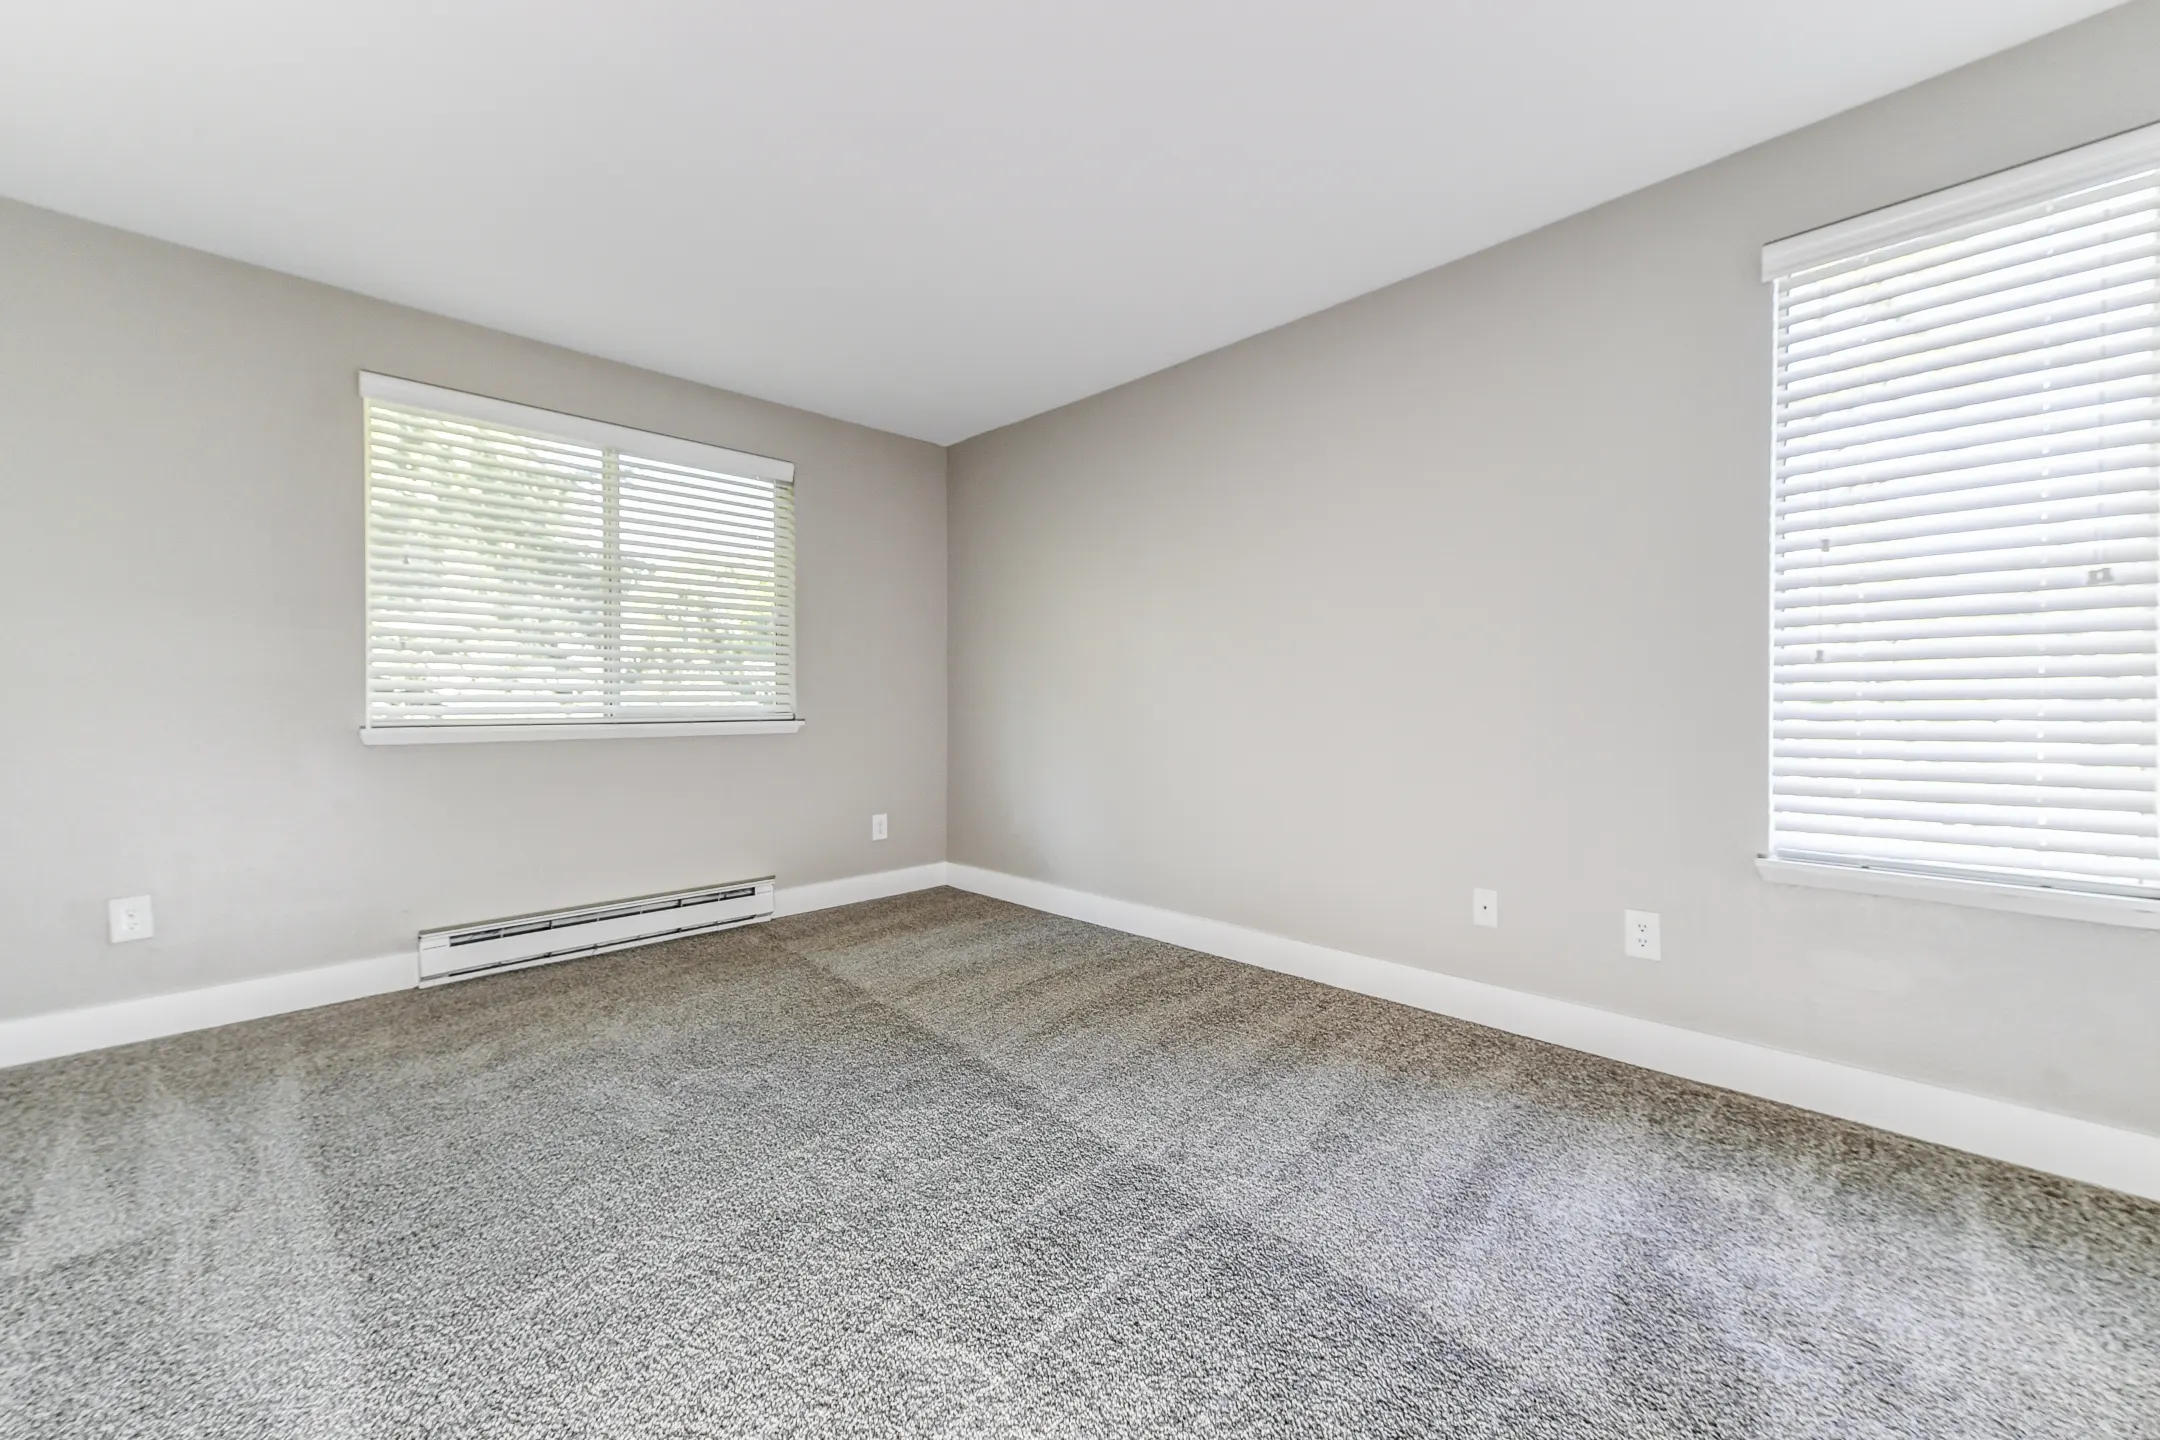 Bedroom - Campbell Run - Woodinville, WA